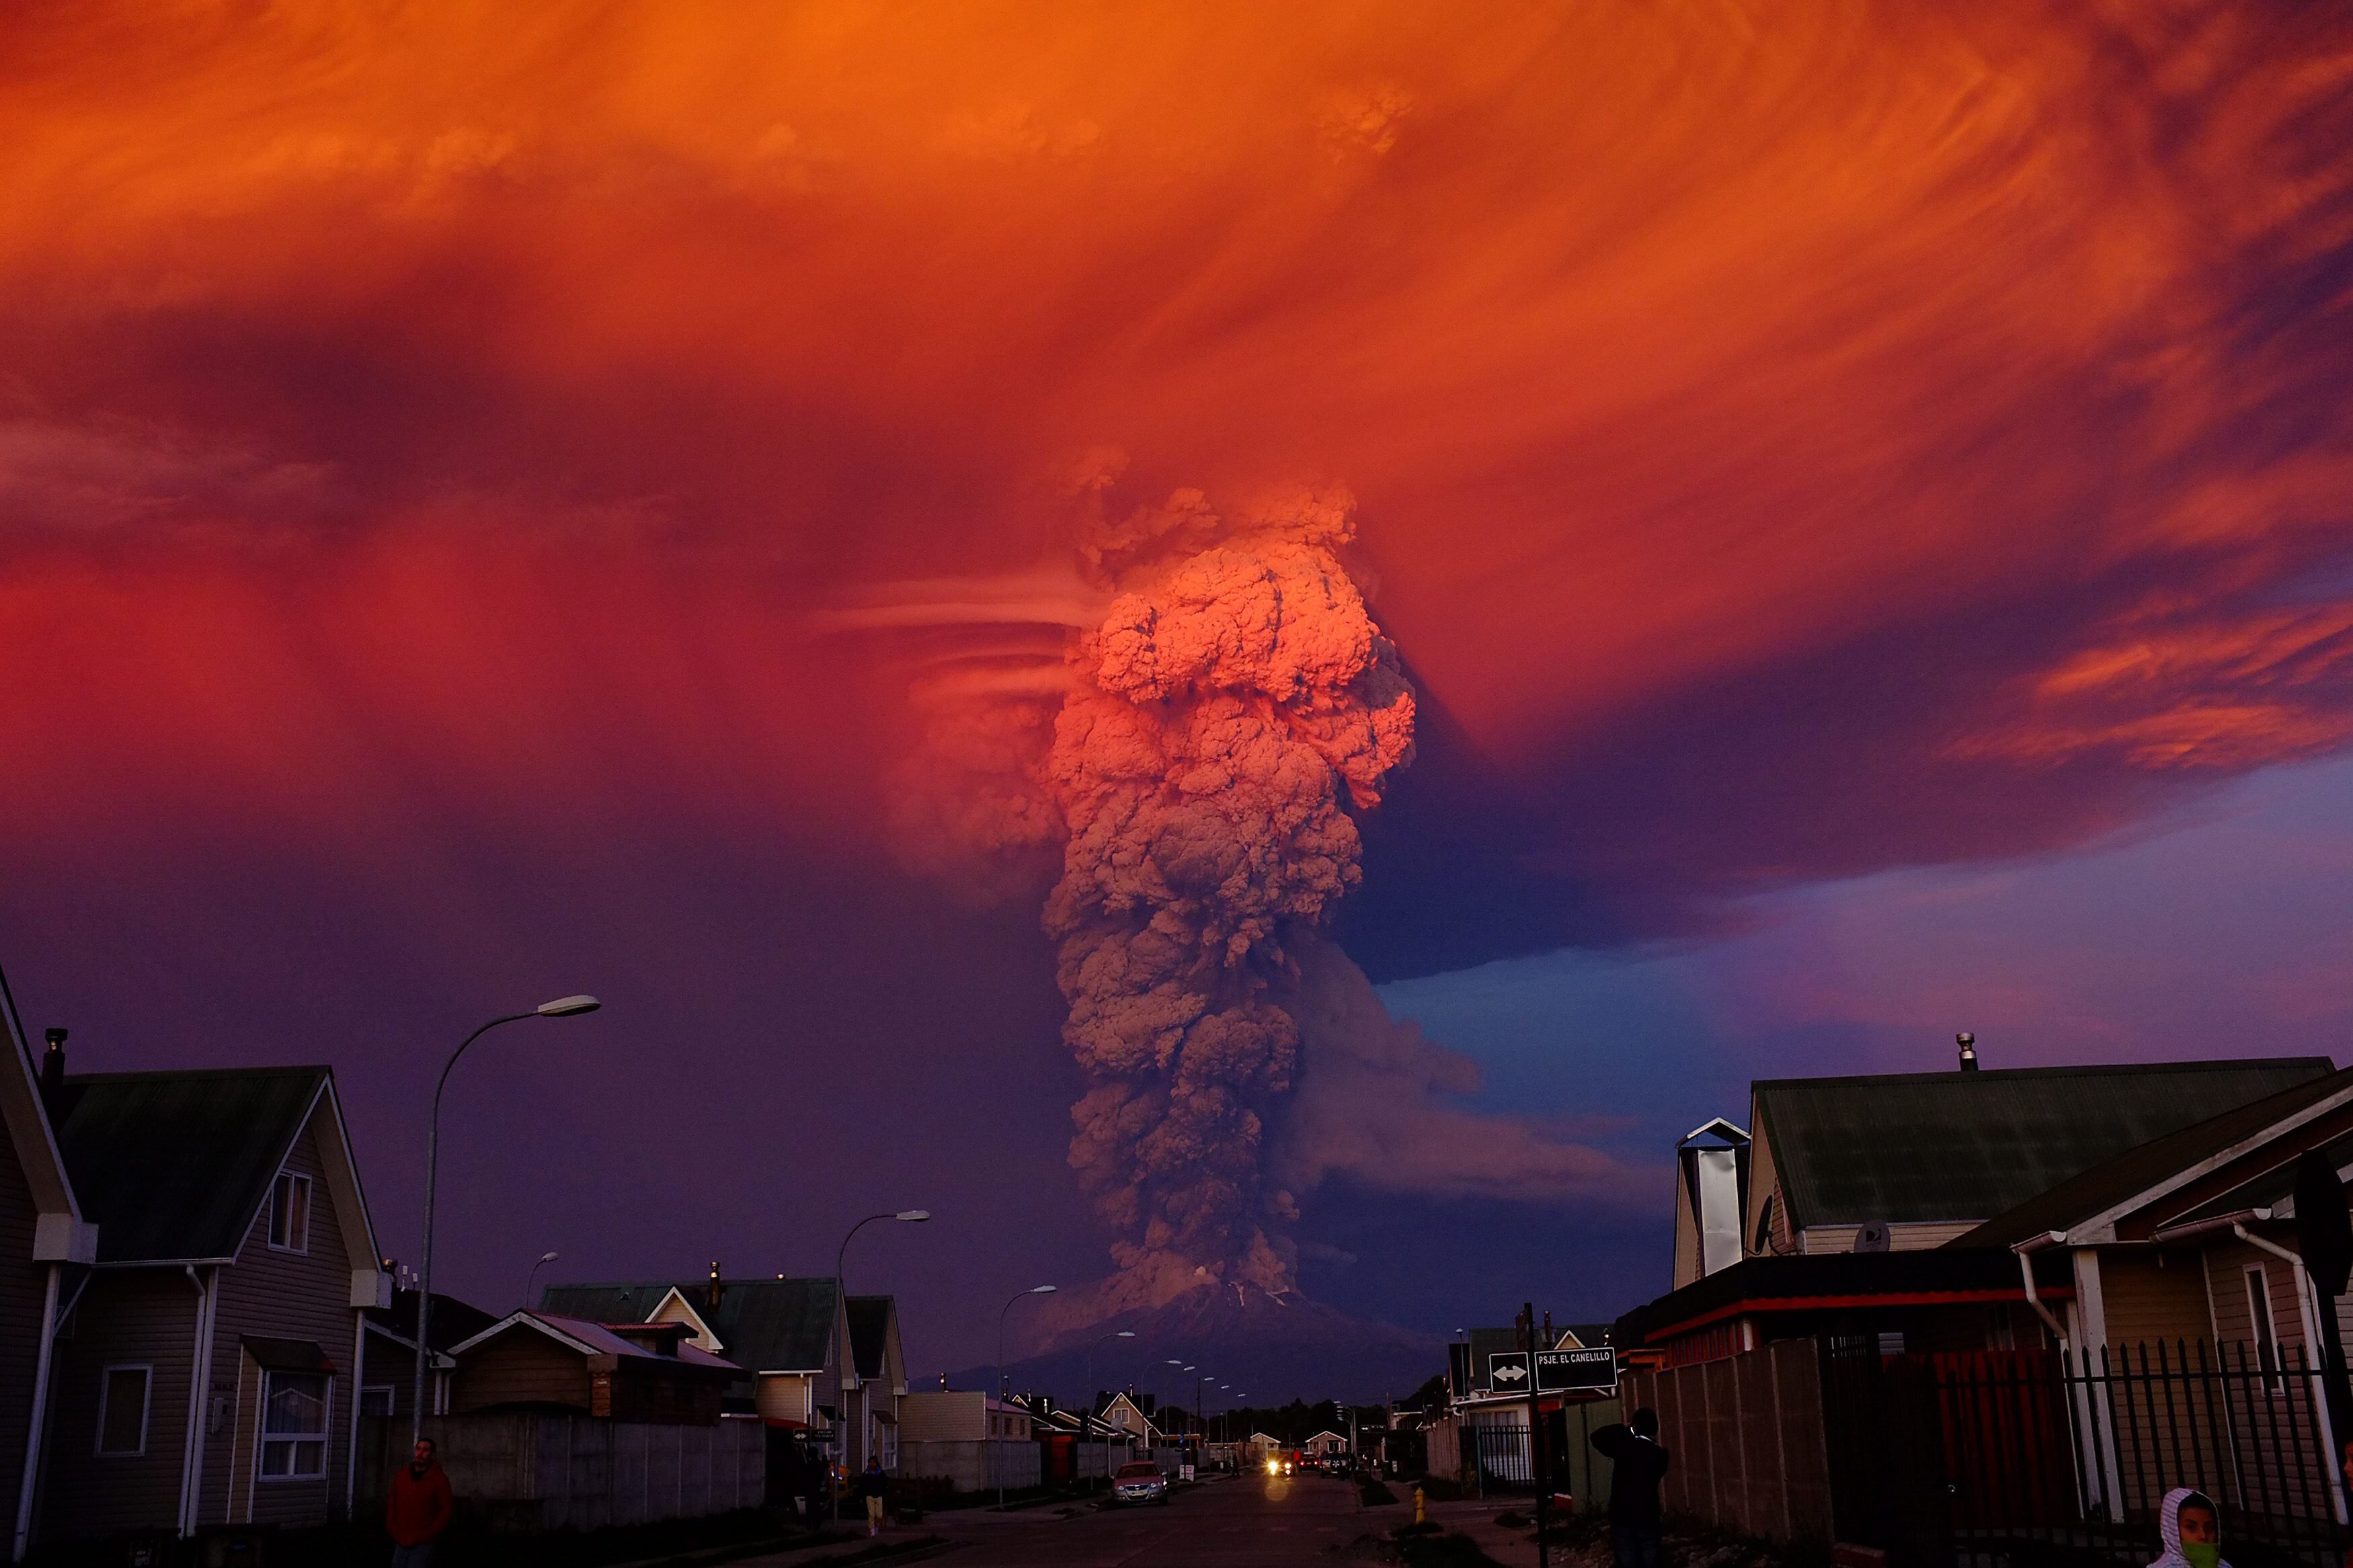 The Chilean Calbuco volcano seen from Puerto Montt, located 600 miles south of Santiago de Chile, Chile on April 22, 2015. The eruption caused a column of smoke over ten miles high. Authorities declared a red alert and ordered the evacuation of around 1500 residents in the area surrounding the volcano. (Alex Vidal Brecas—EPA)